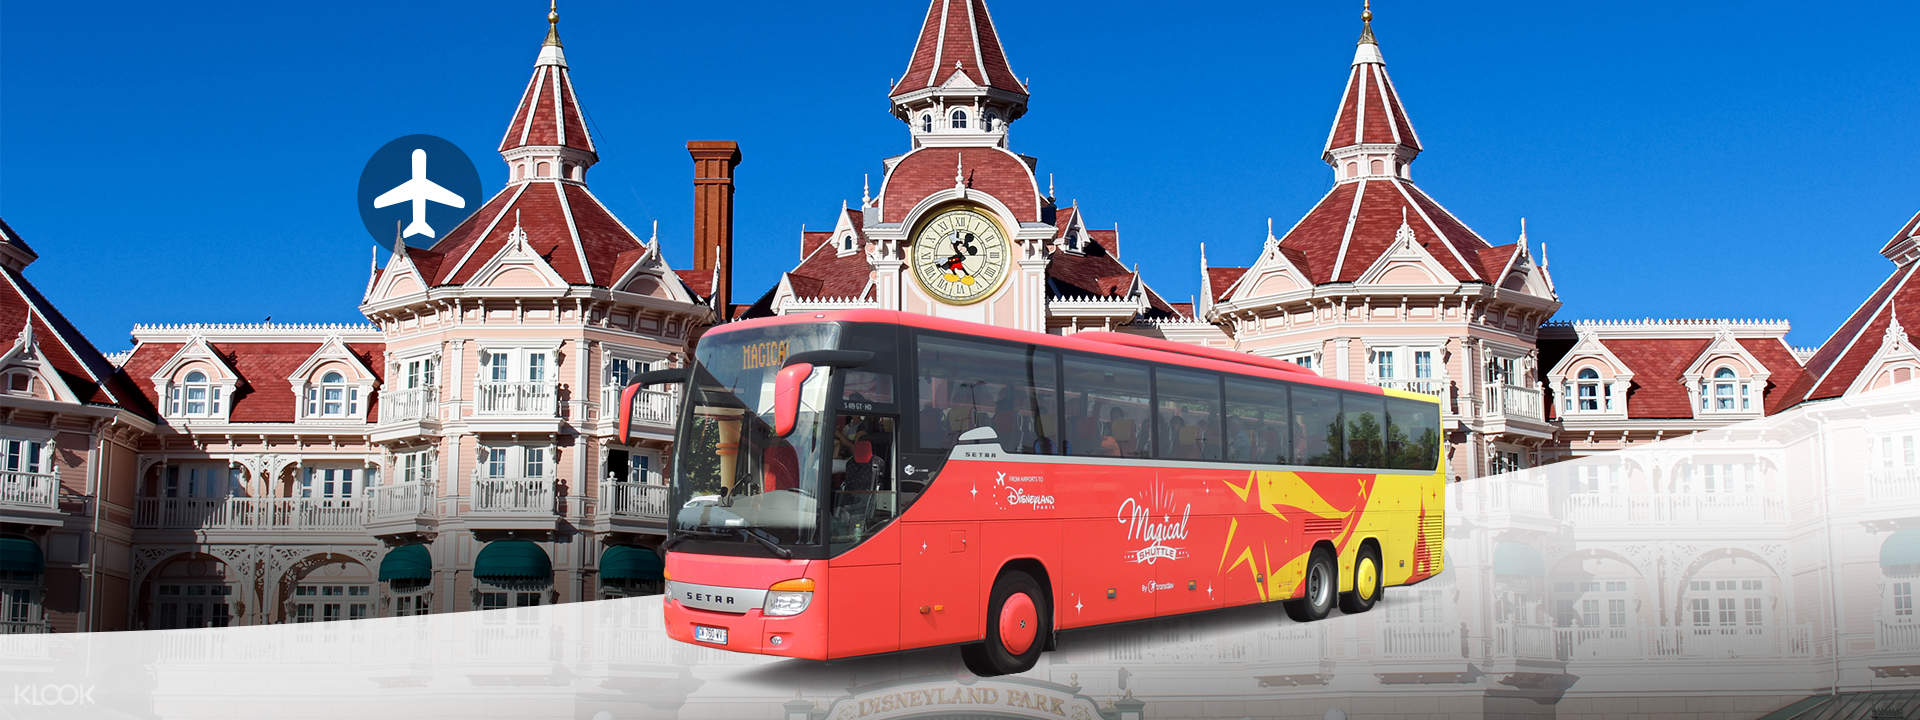 disney paris hotels with free shuttle